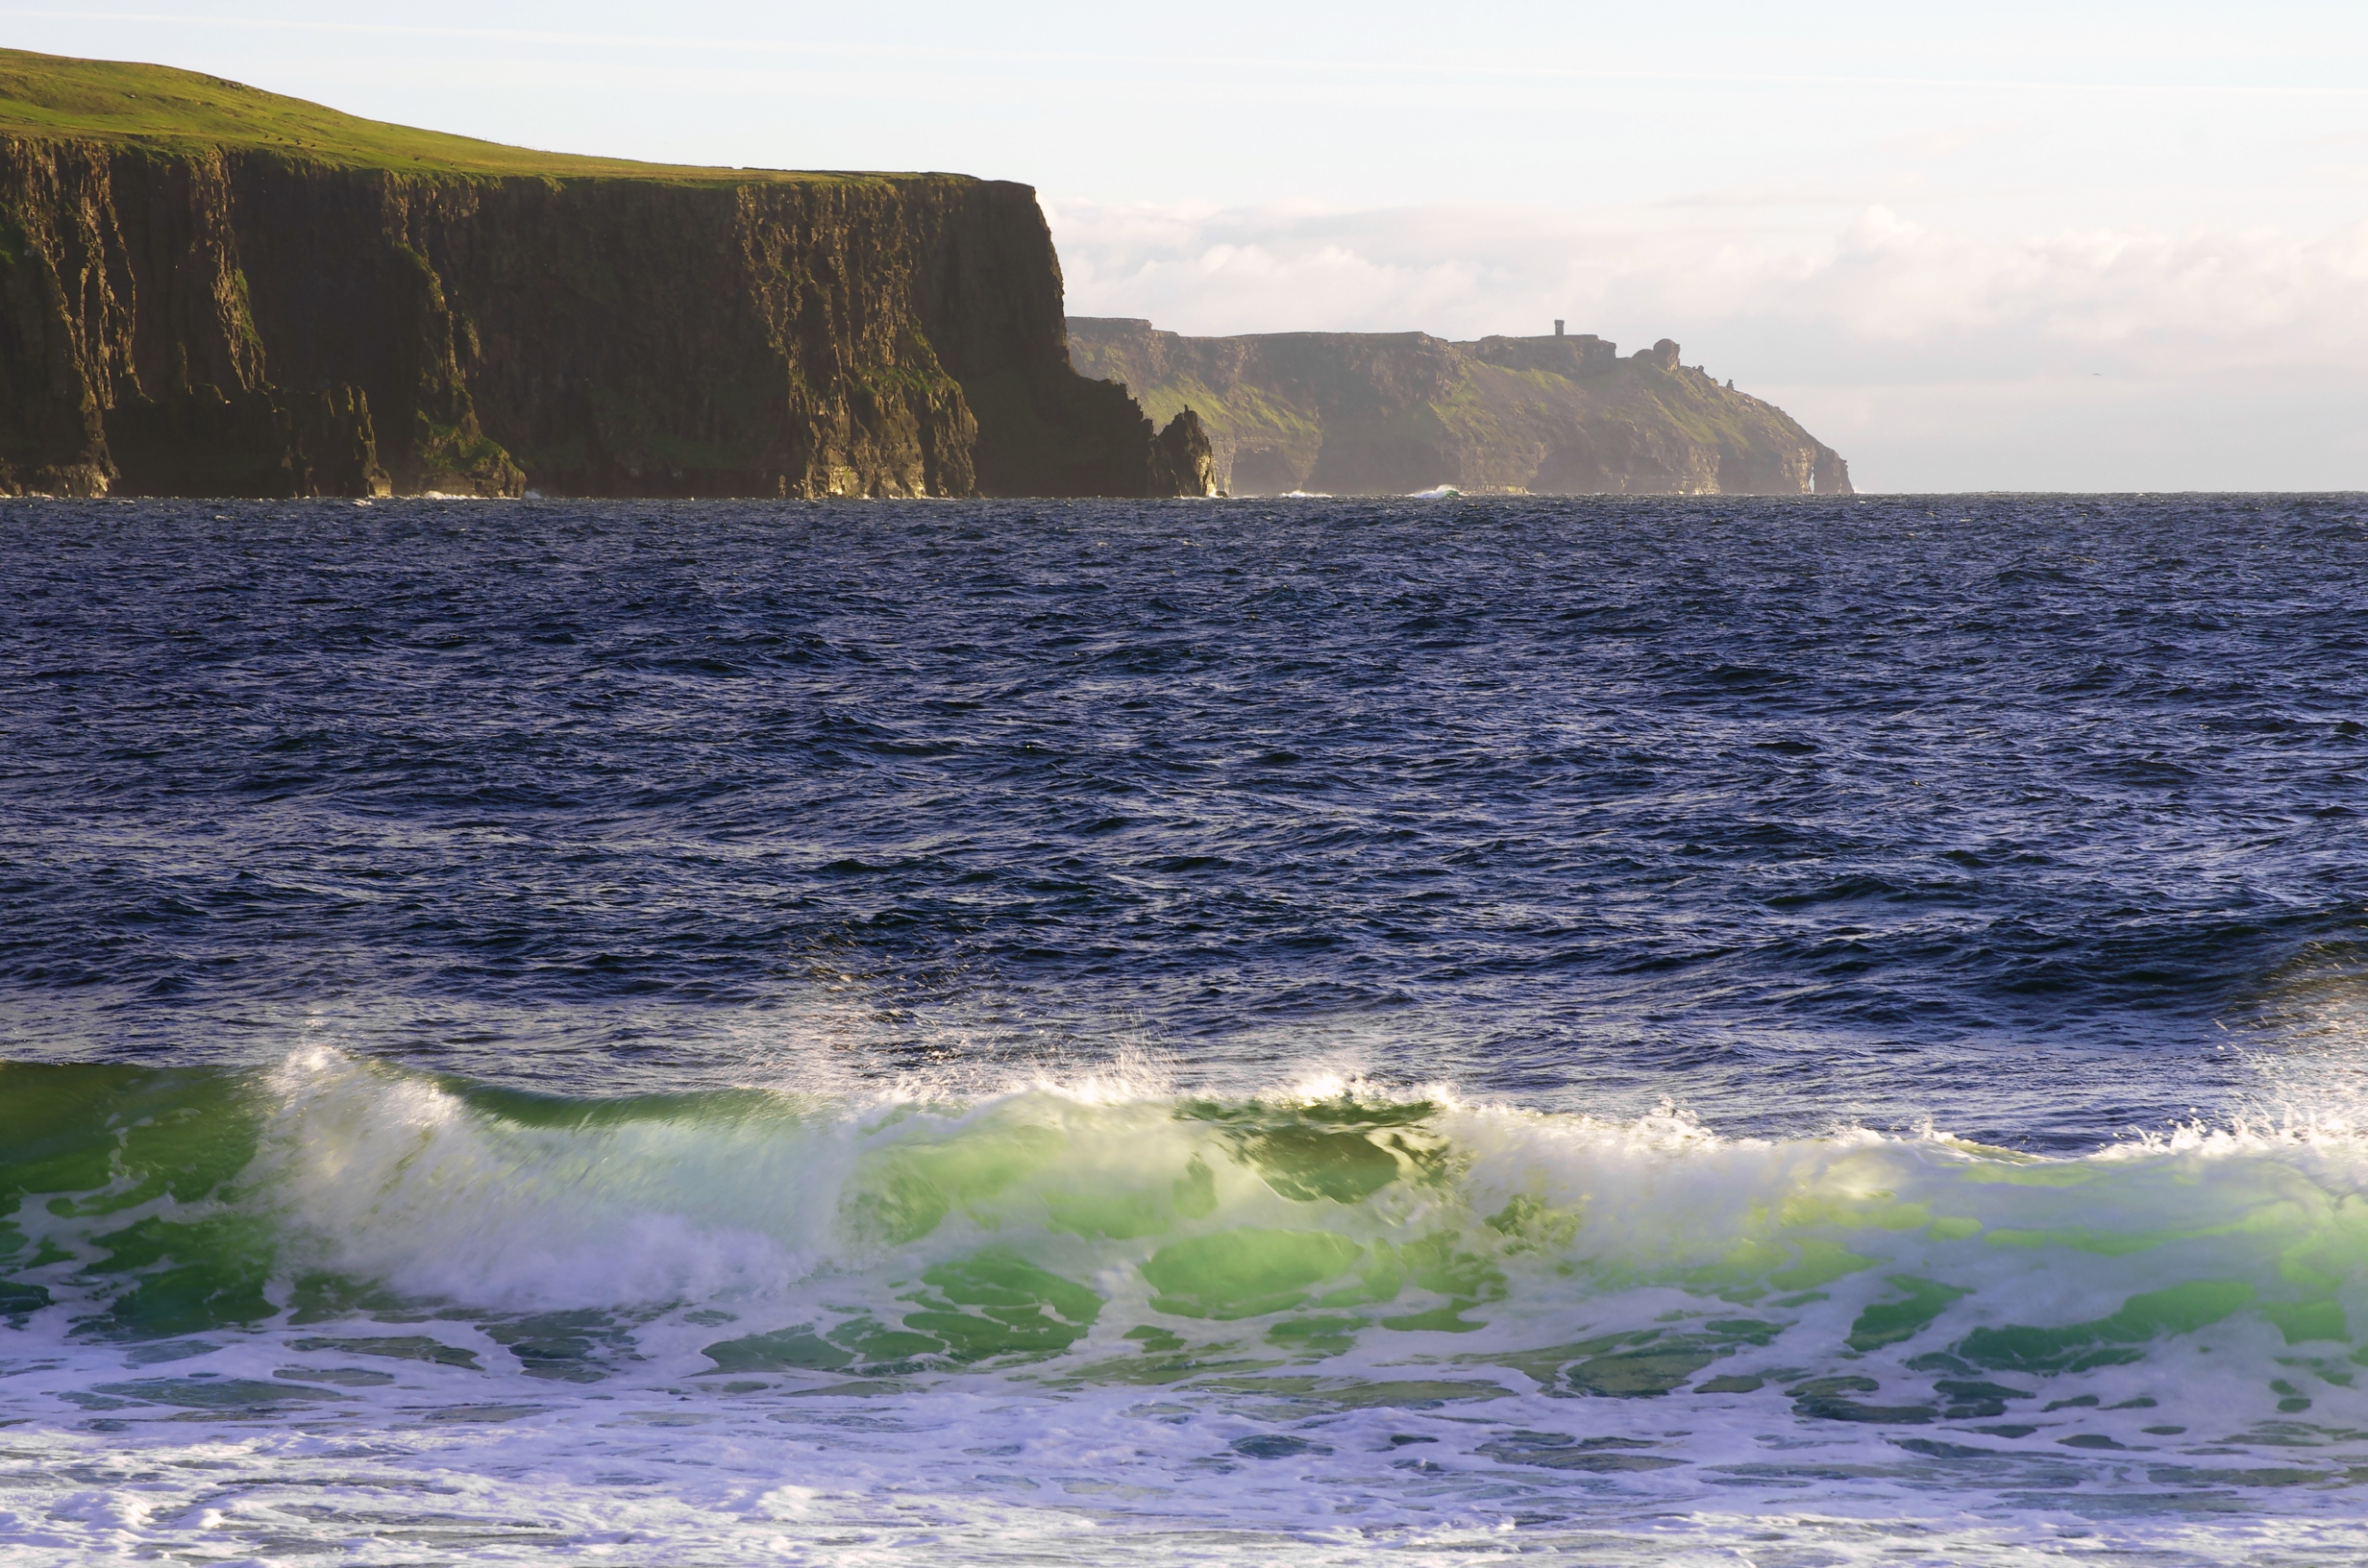 Discover Ireland’s Wild Atlantic Way in Luxury – Private Driver Guide Vacation